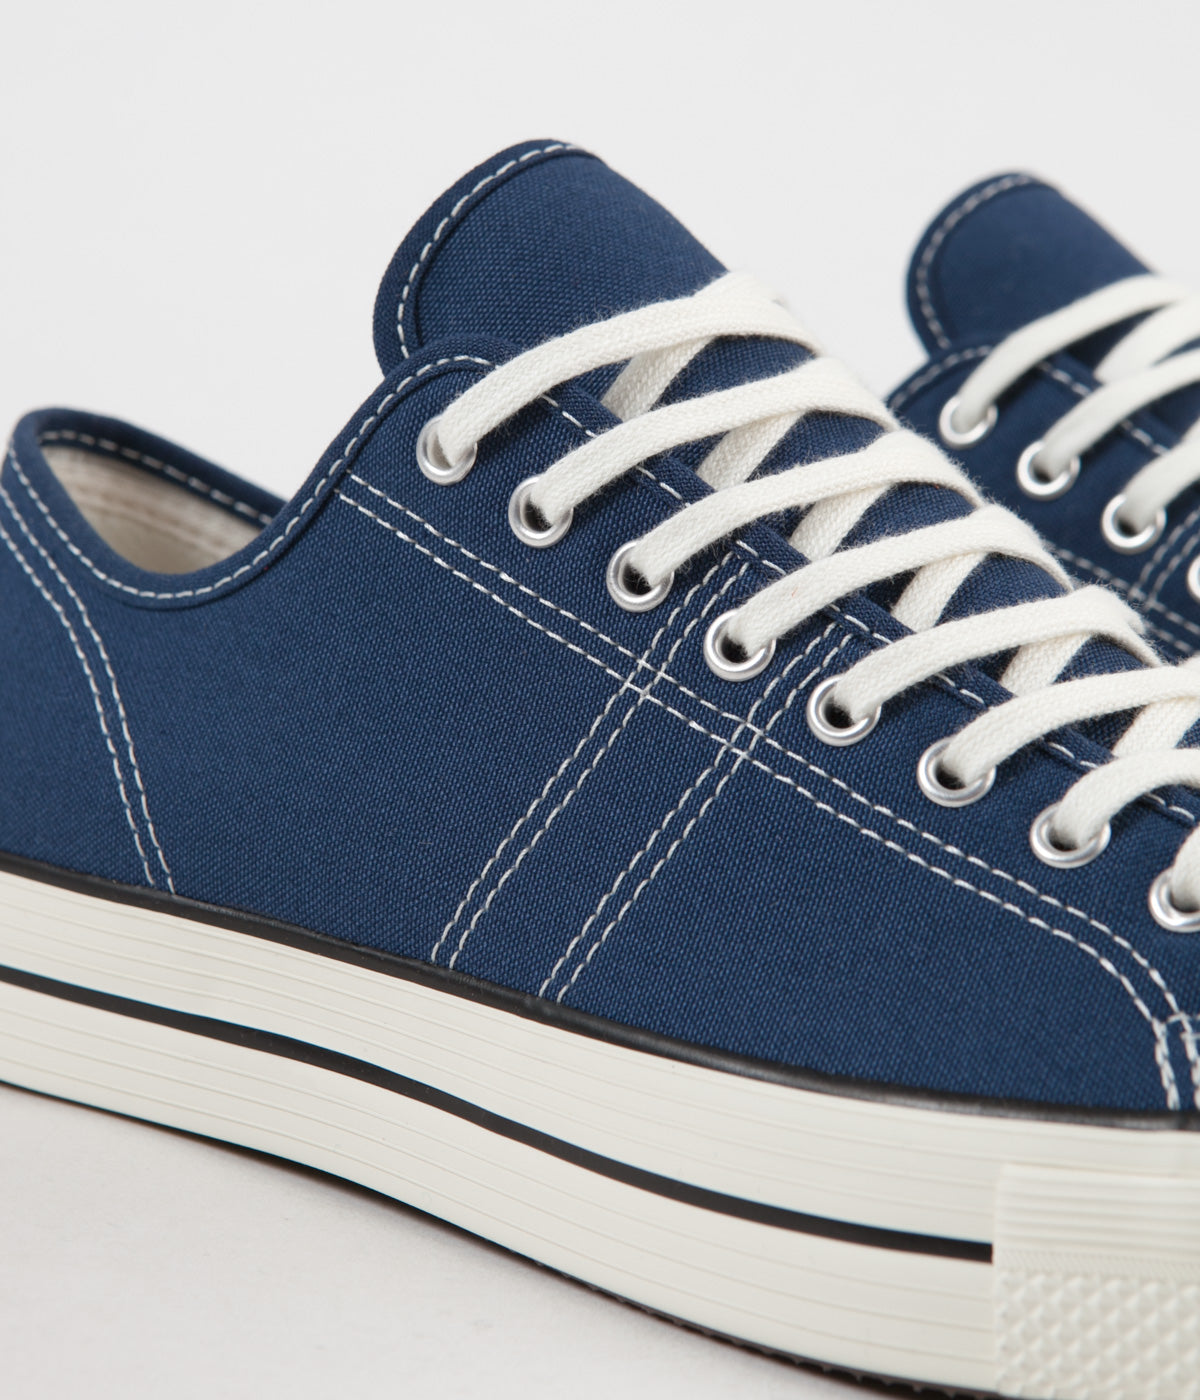 Converse Lucky Star Ox Shoes - Navy 